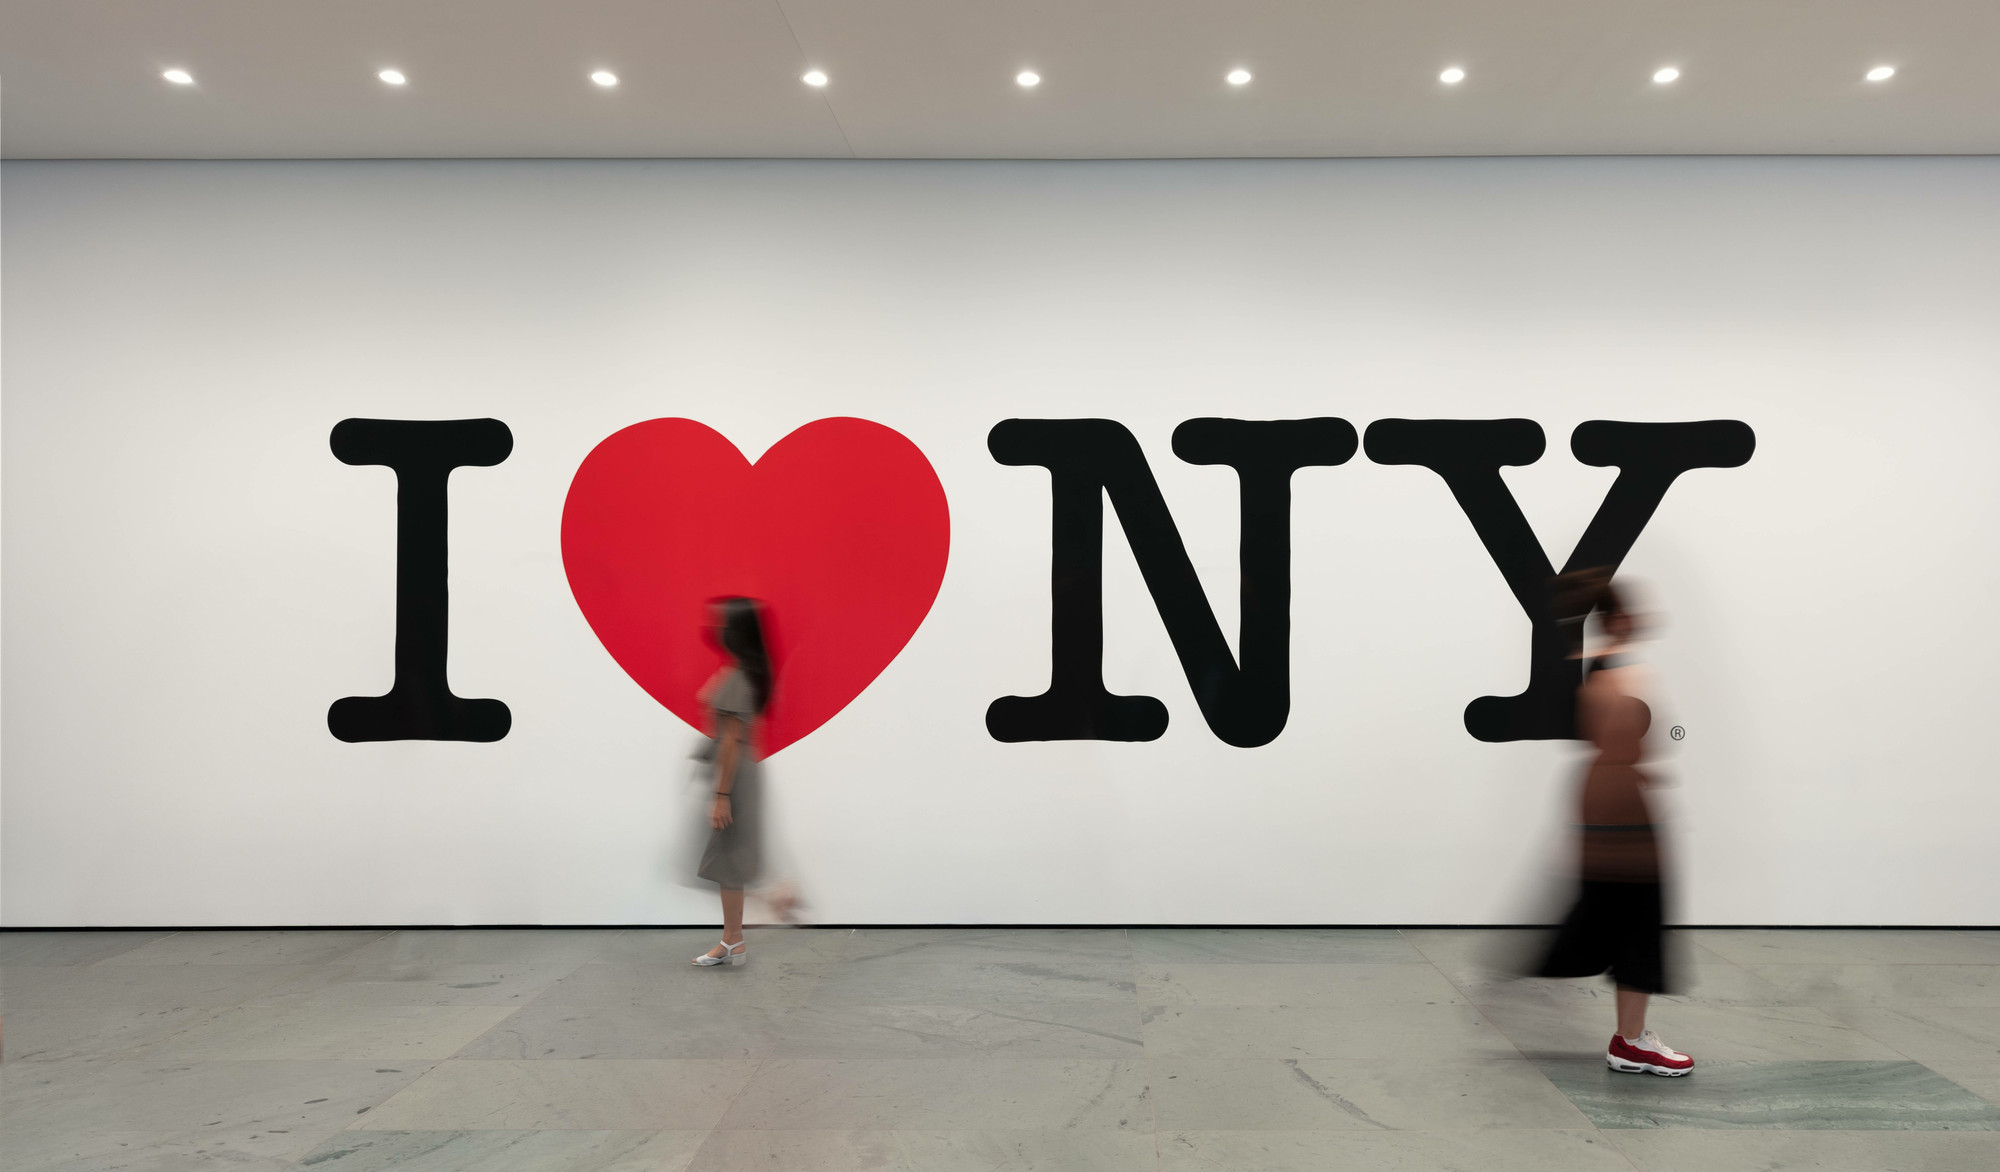 Milton Glaser’s I ♥ NY. 1976. I LOVE NY name and logos are registered trademarks and service marks of the New York State Department of Economic Development, used under license by the Museum of Modern Art